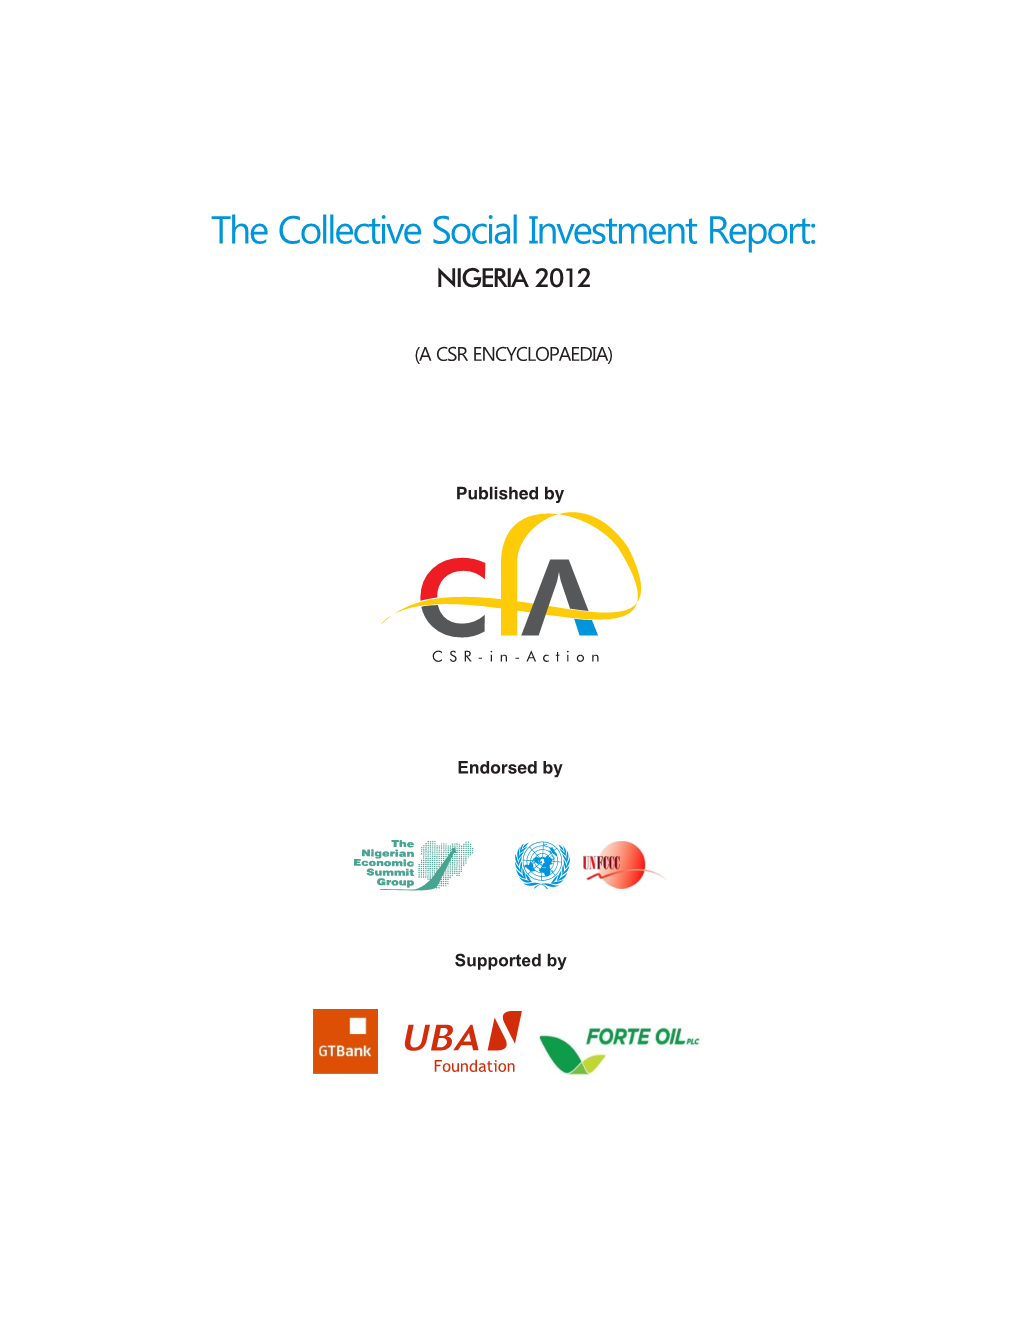 Compendium Was Compiled by CSR-In-Action, a Nigerian Based Social Enterprise